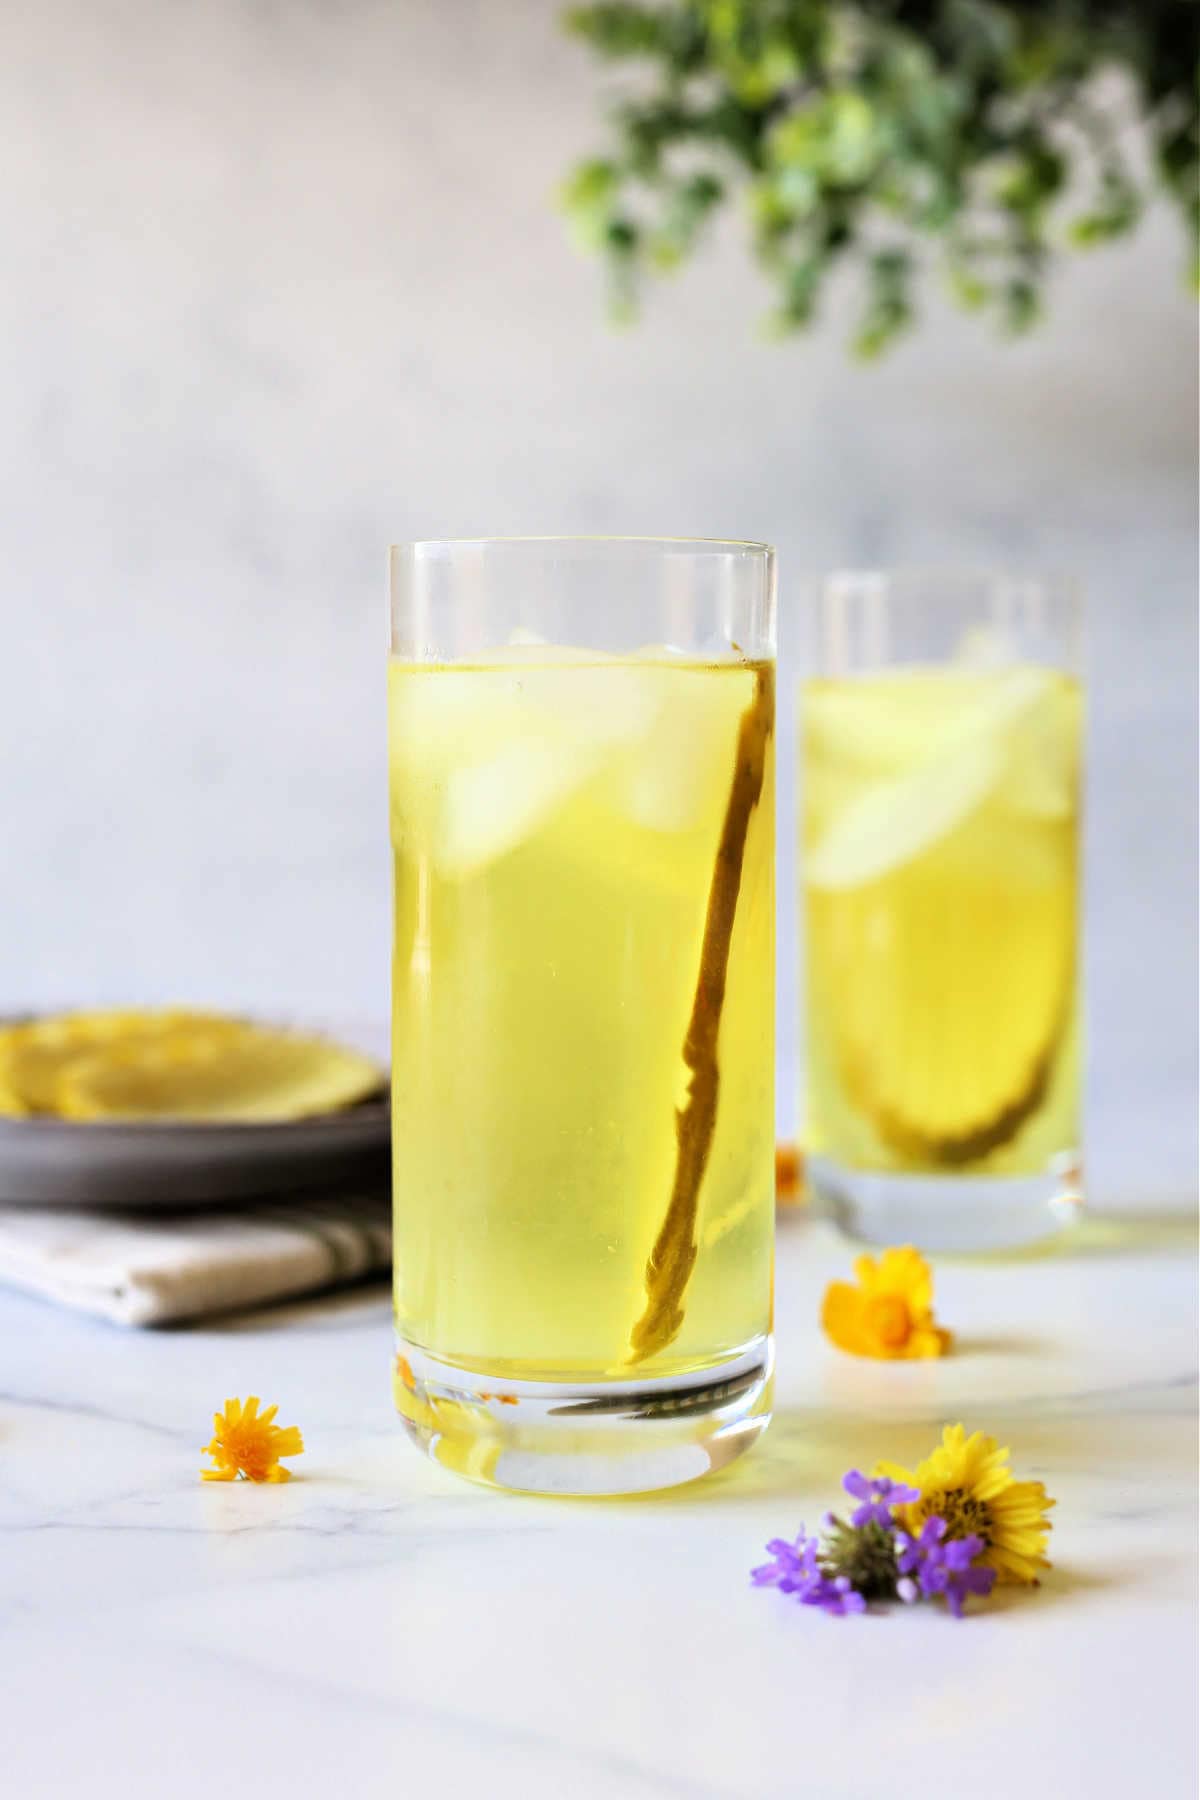 benefits of pickle juice as a drink in two glasses